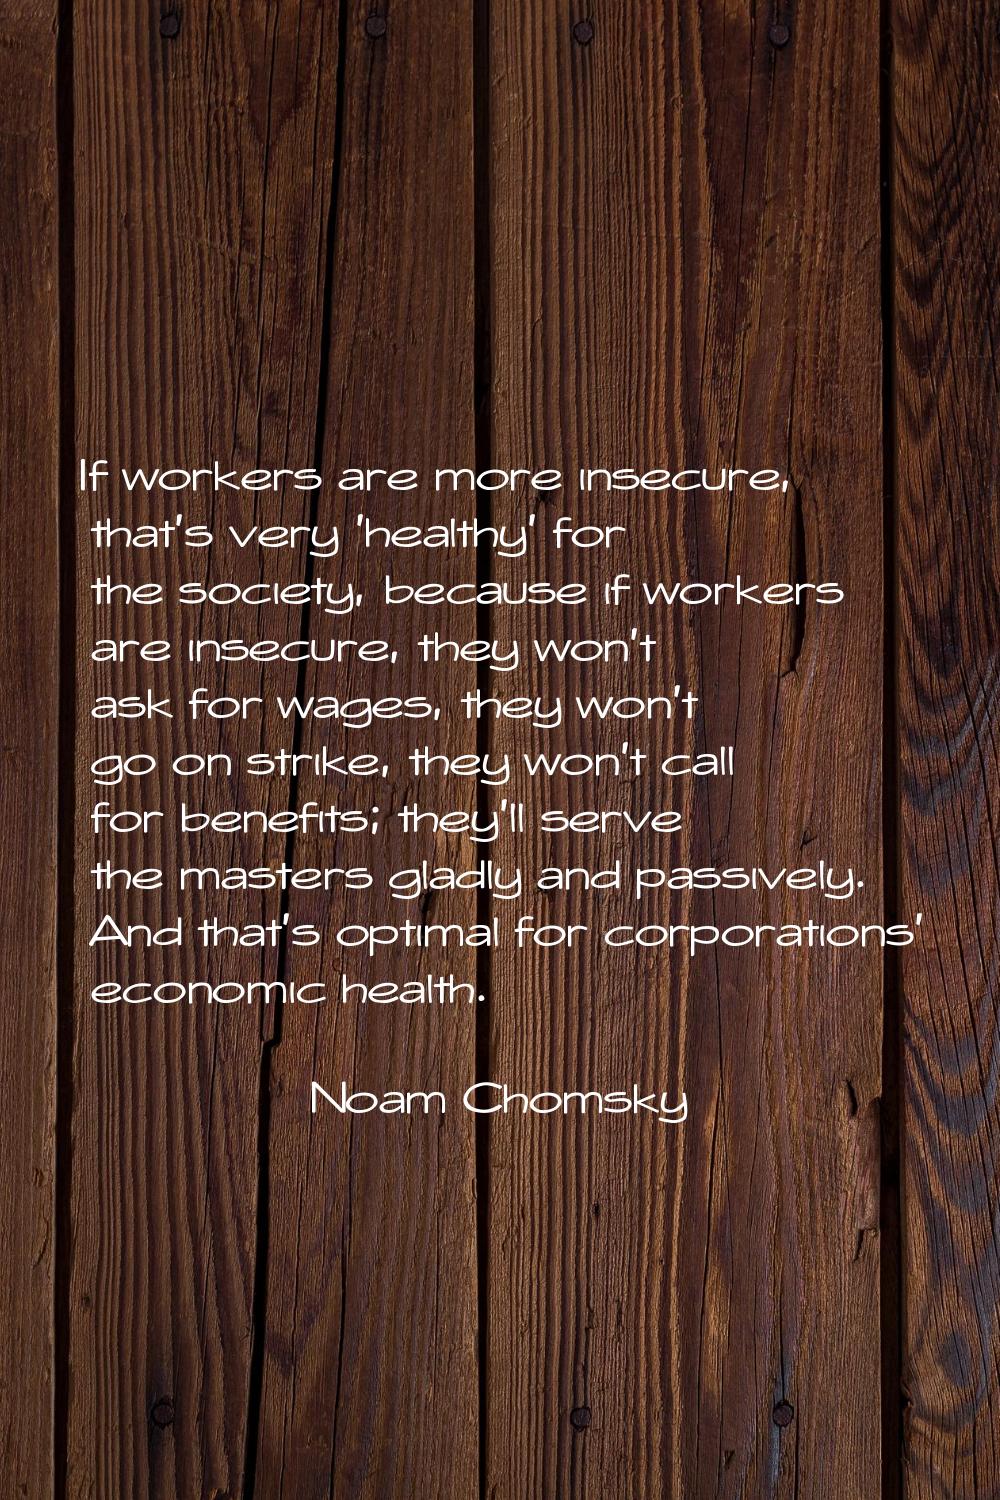 If workers are more insecure, that's very 'healthy' for the society, because if workers are insecur